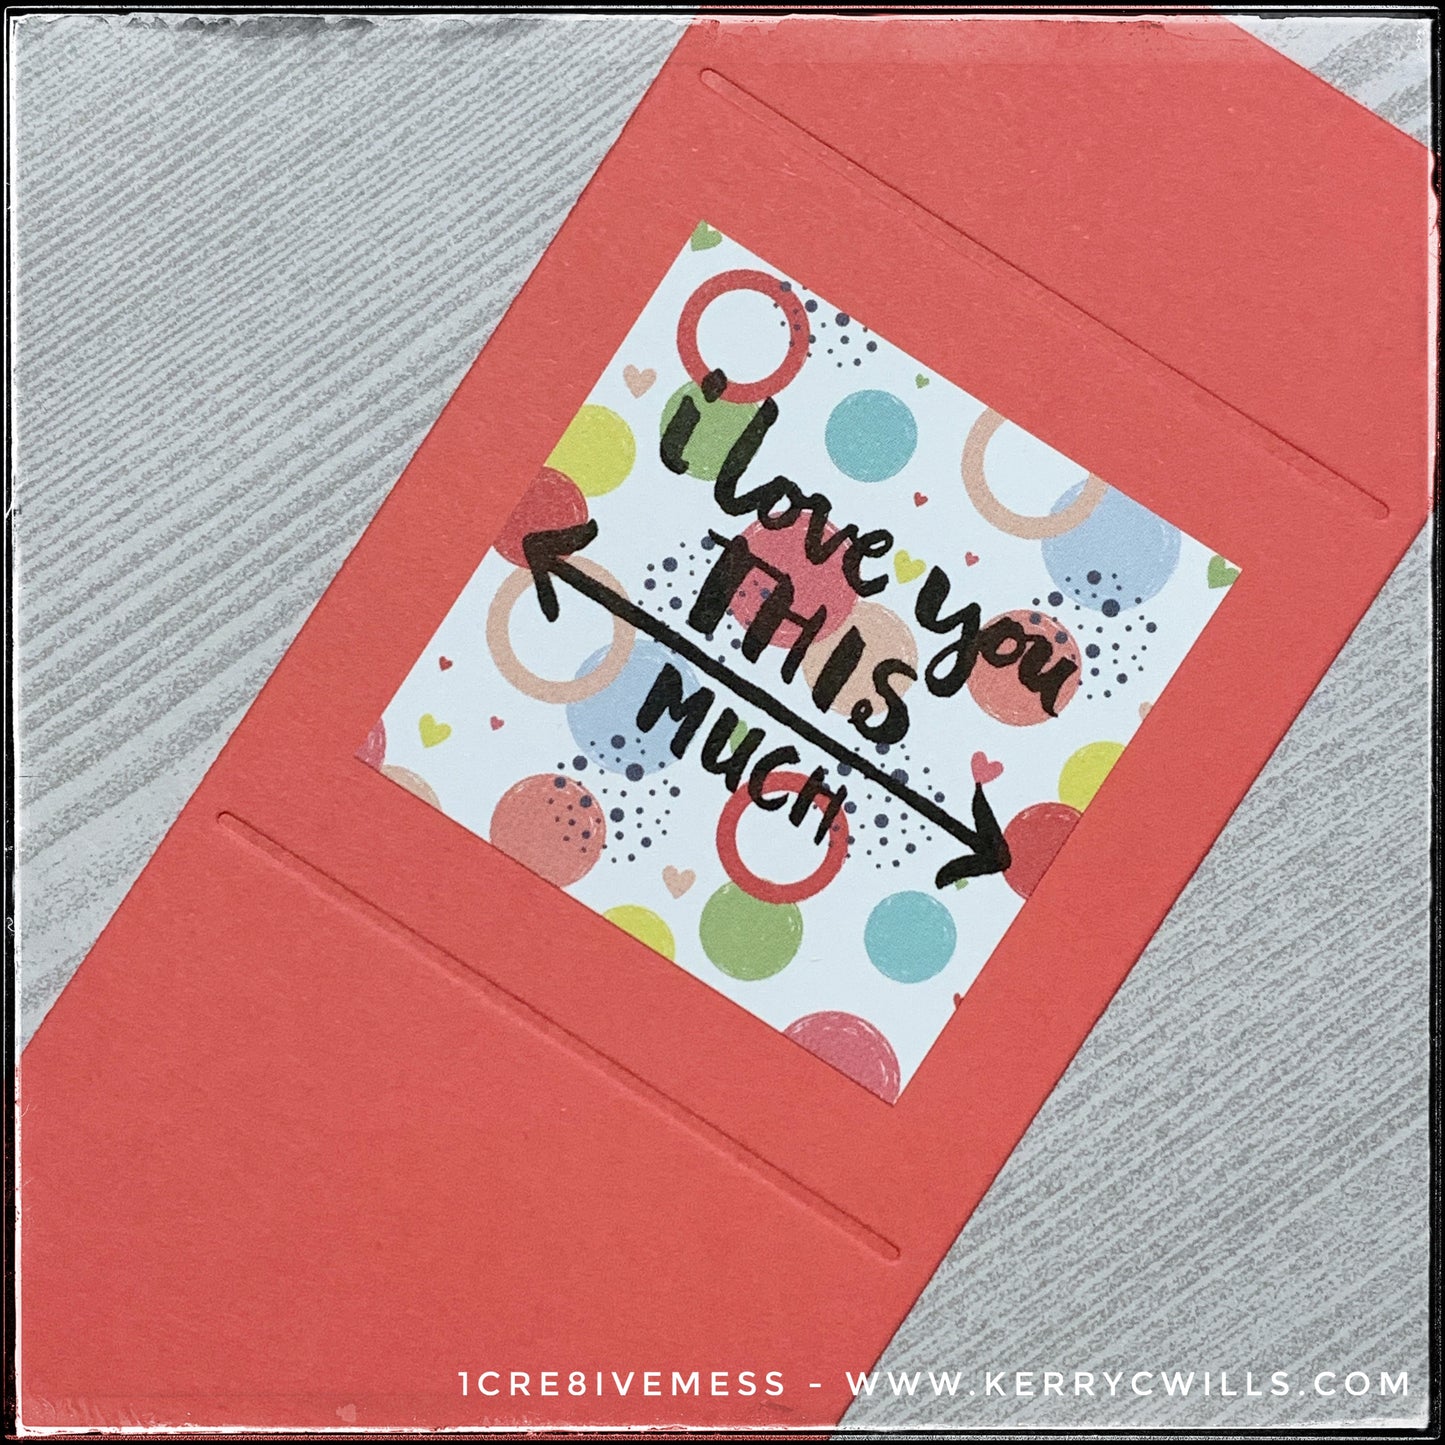 I Love You This Much [Lunchbox] Handmade Card